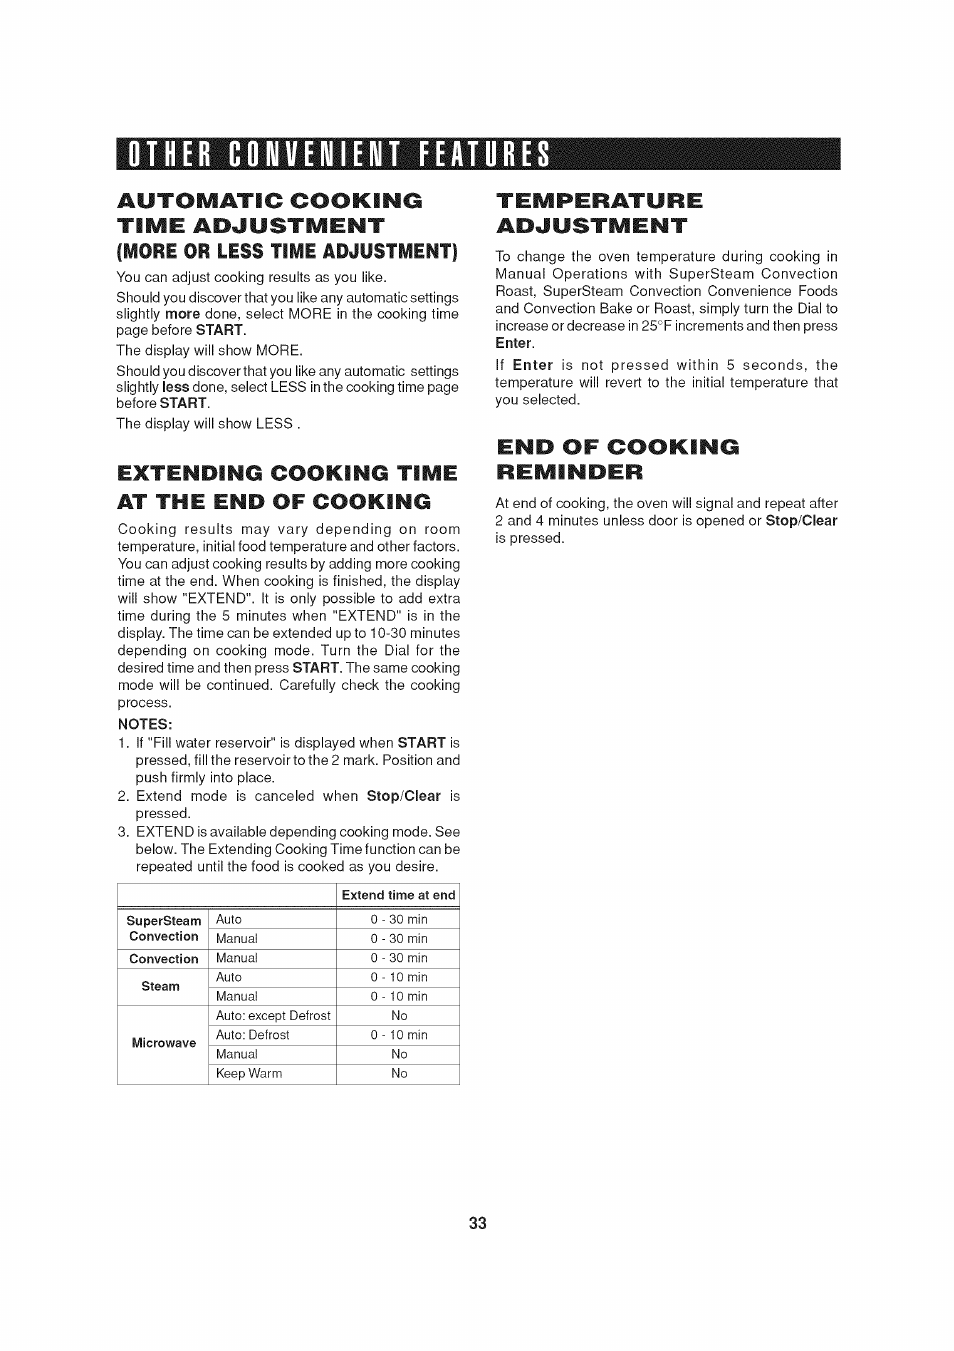 Other convenient features, Extending cooking time at the end of cooking, Notes | Temperature, Adjustment, End of cooking reminder, Other convenient features -35 | Sharp AX-1200 User Manual | Page 35 / 43